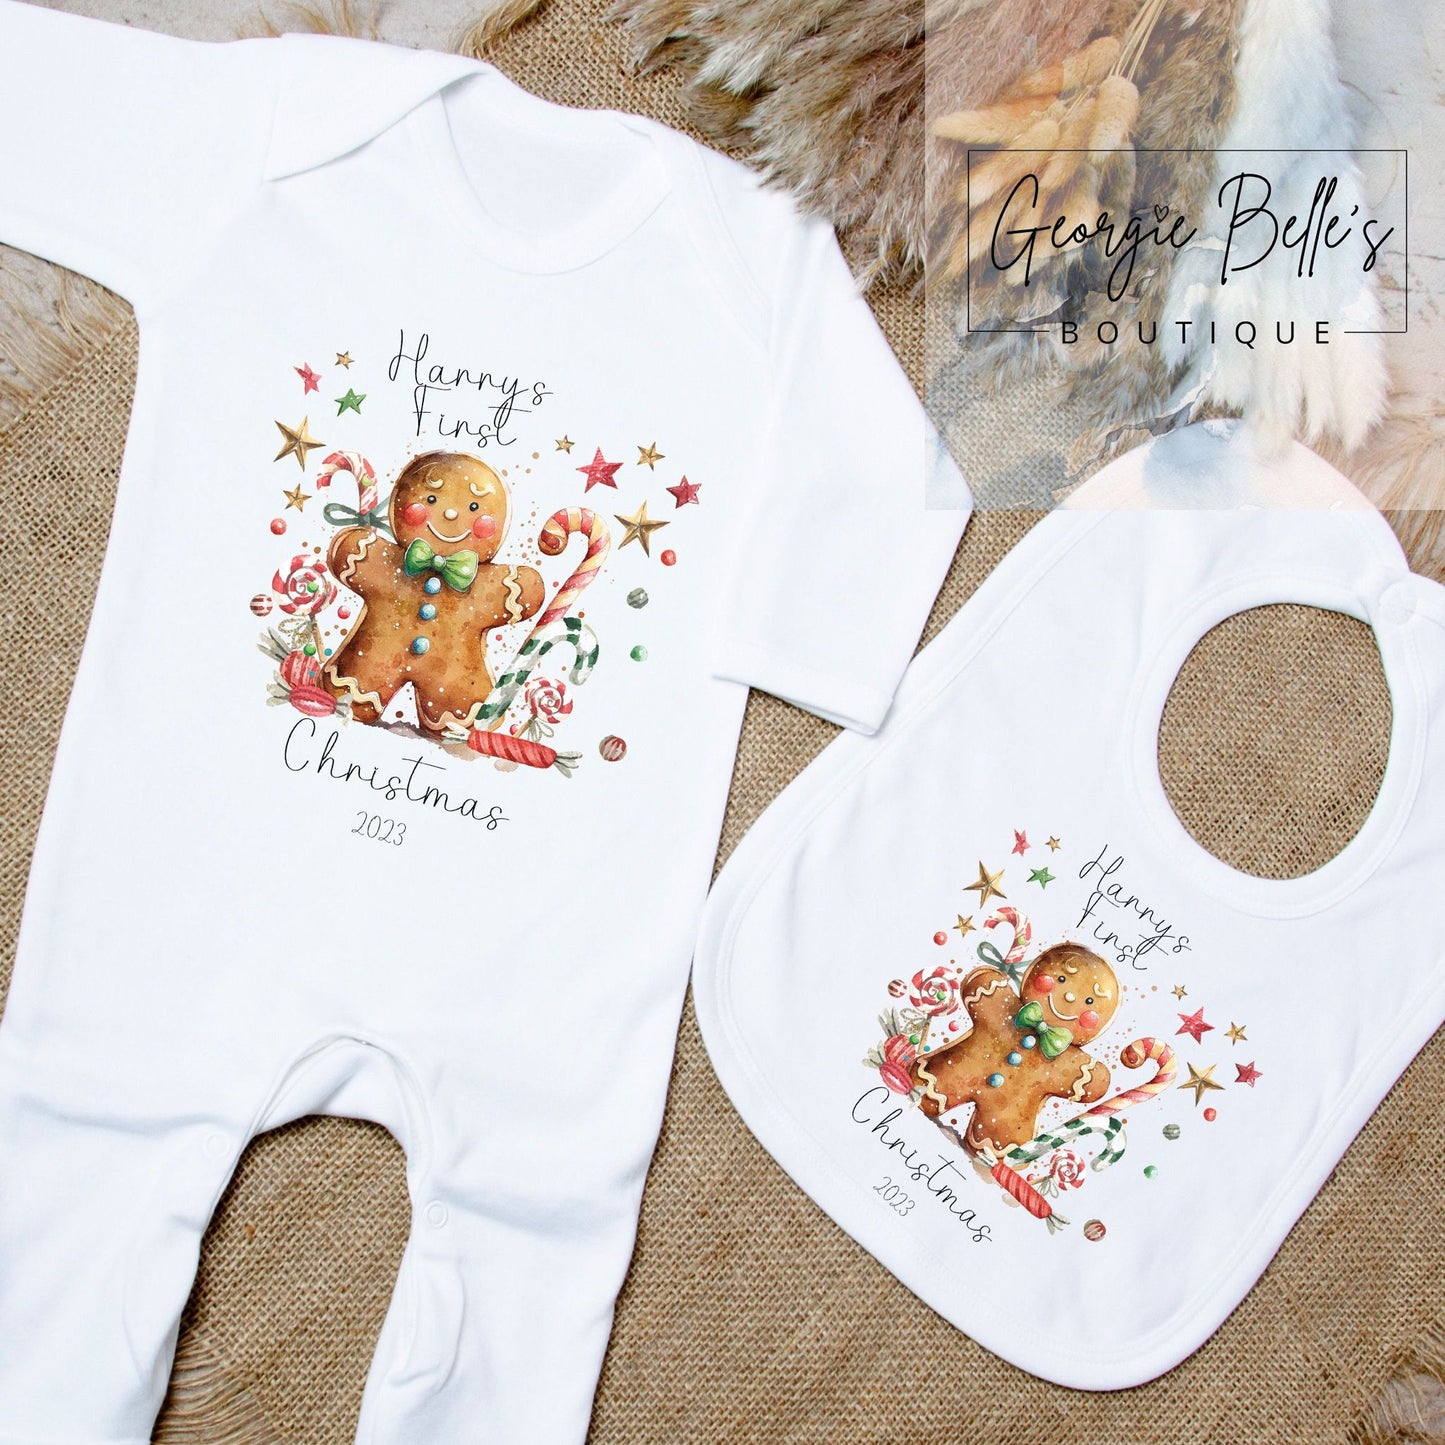 My 1st Christmas Personalised Vest / Babygrow - Gingerbread Design